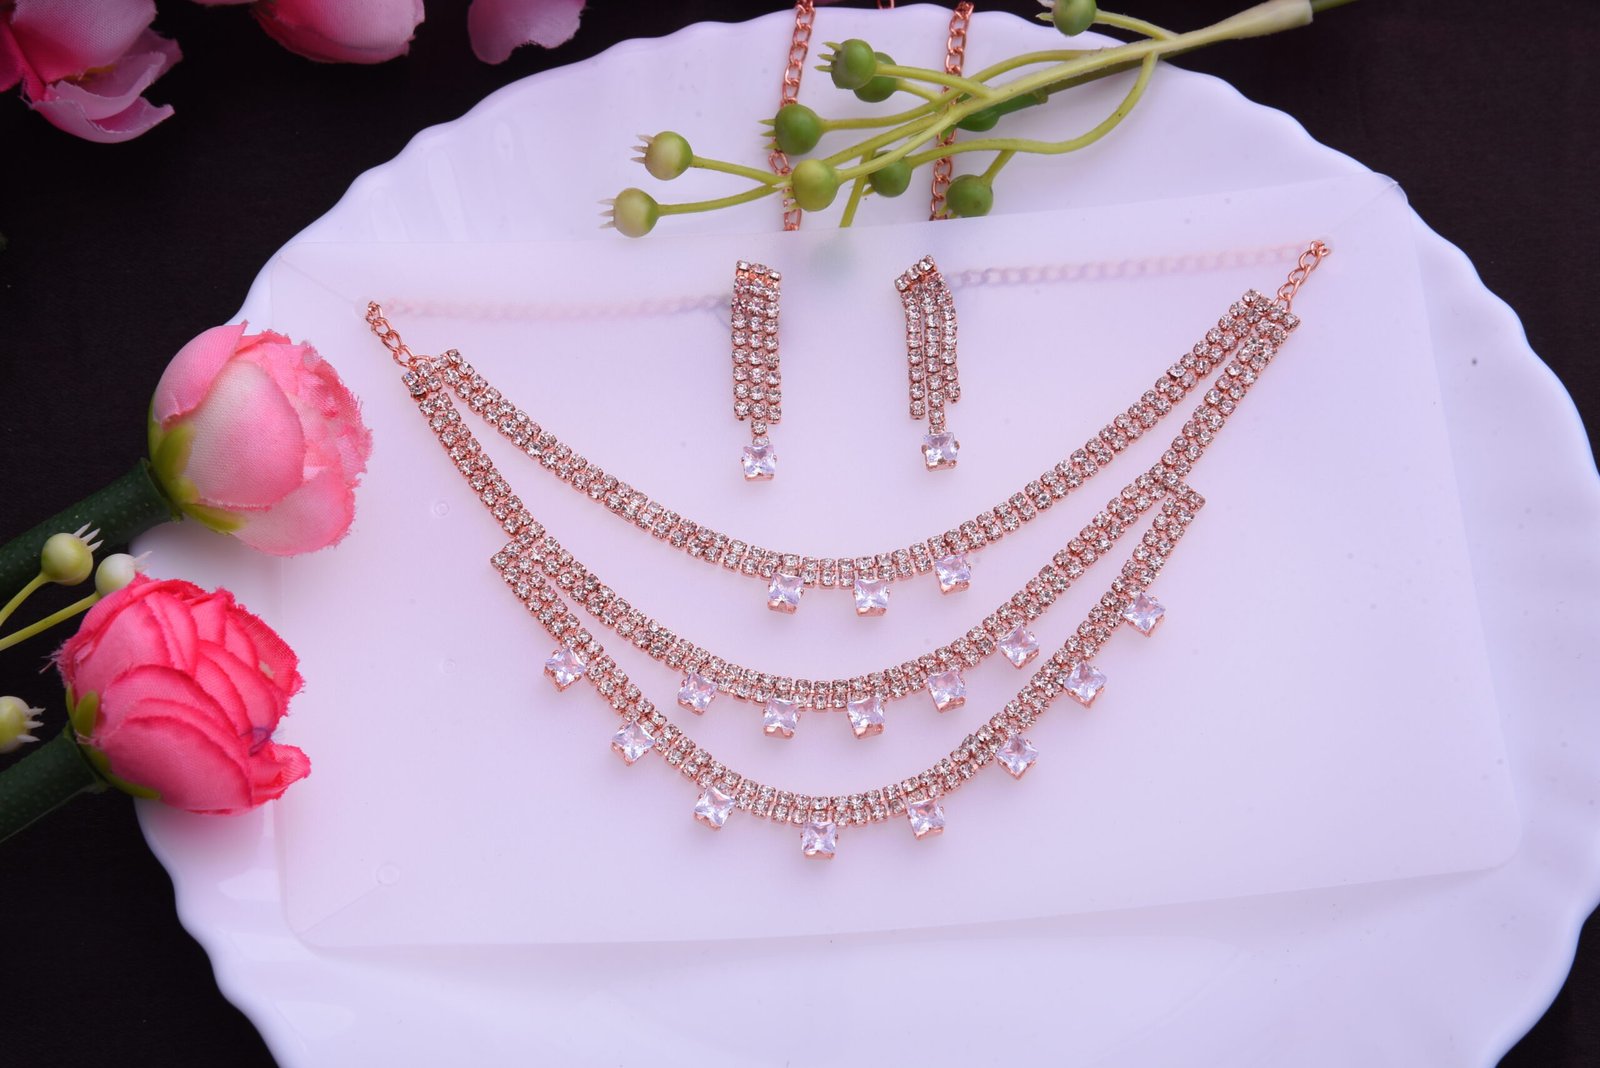 Zirconia & Crystal Necklace Set with Drop Earrings